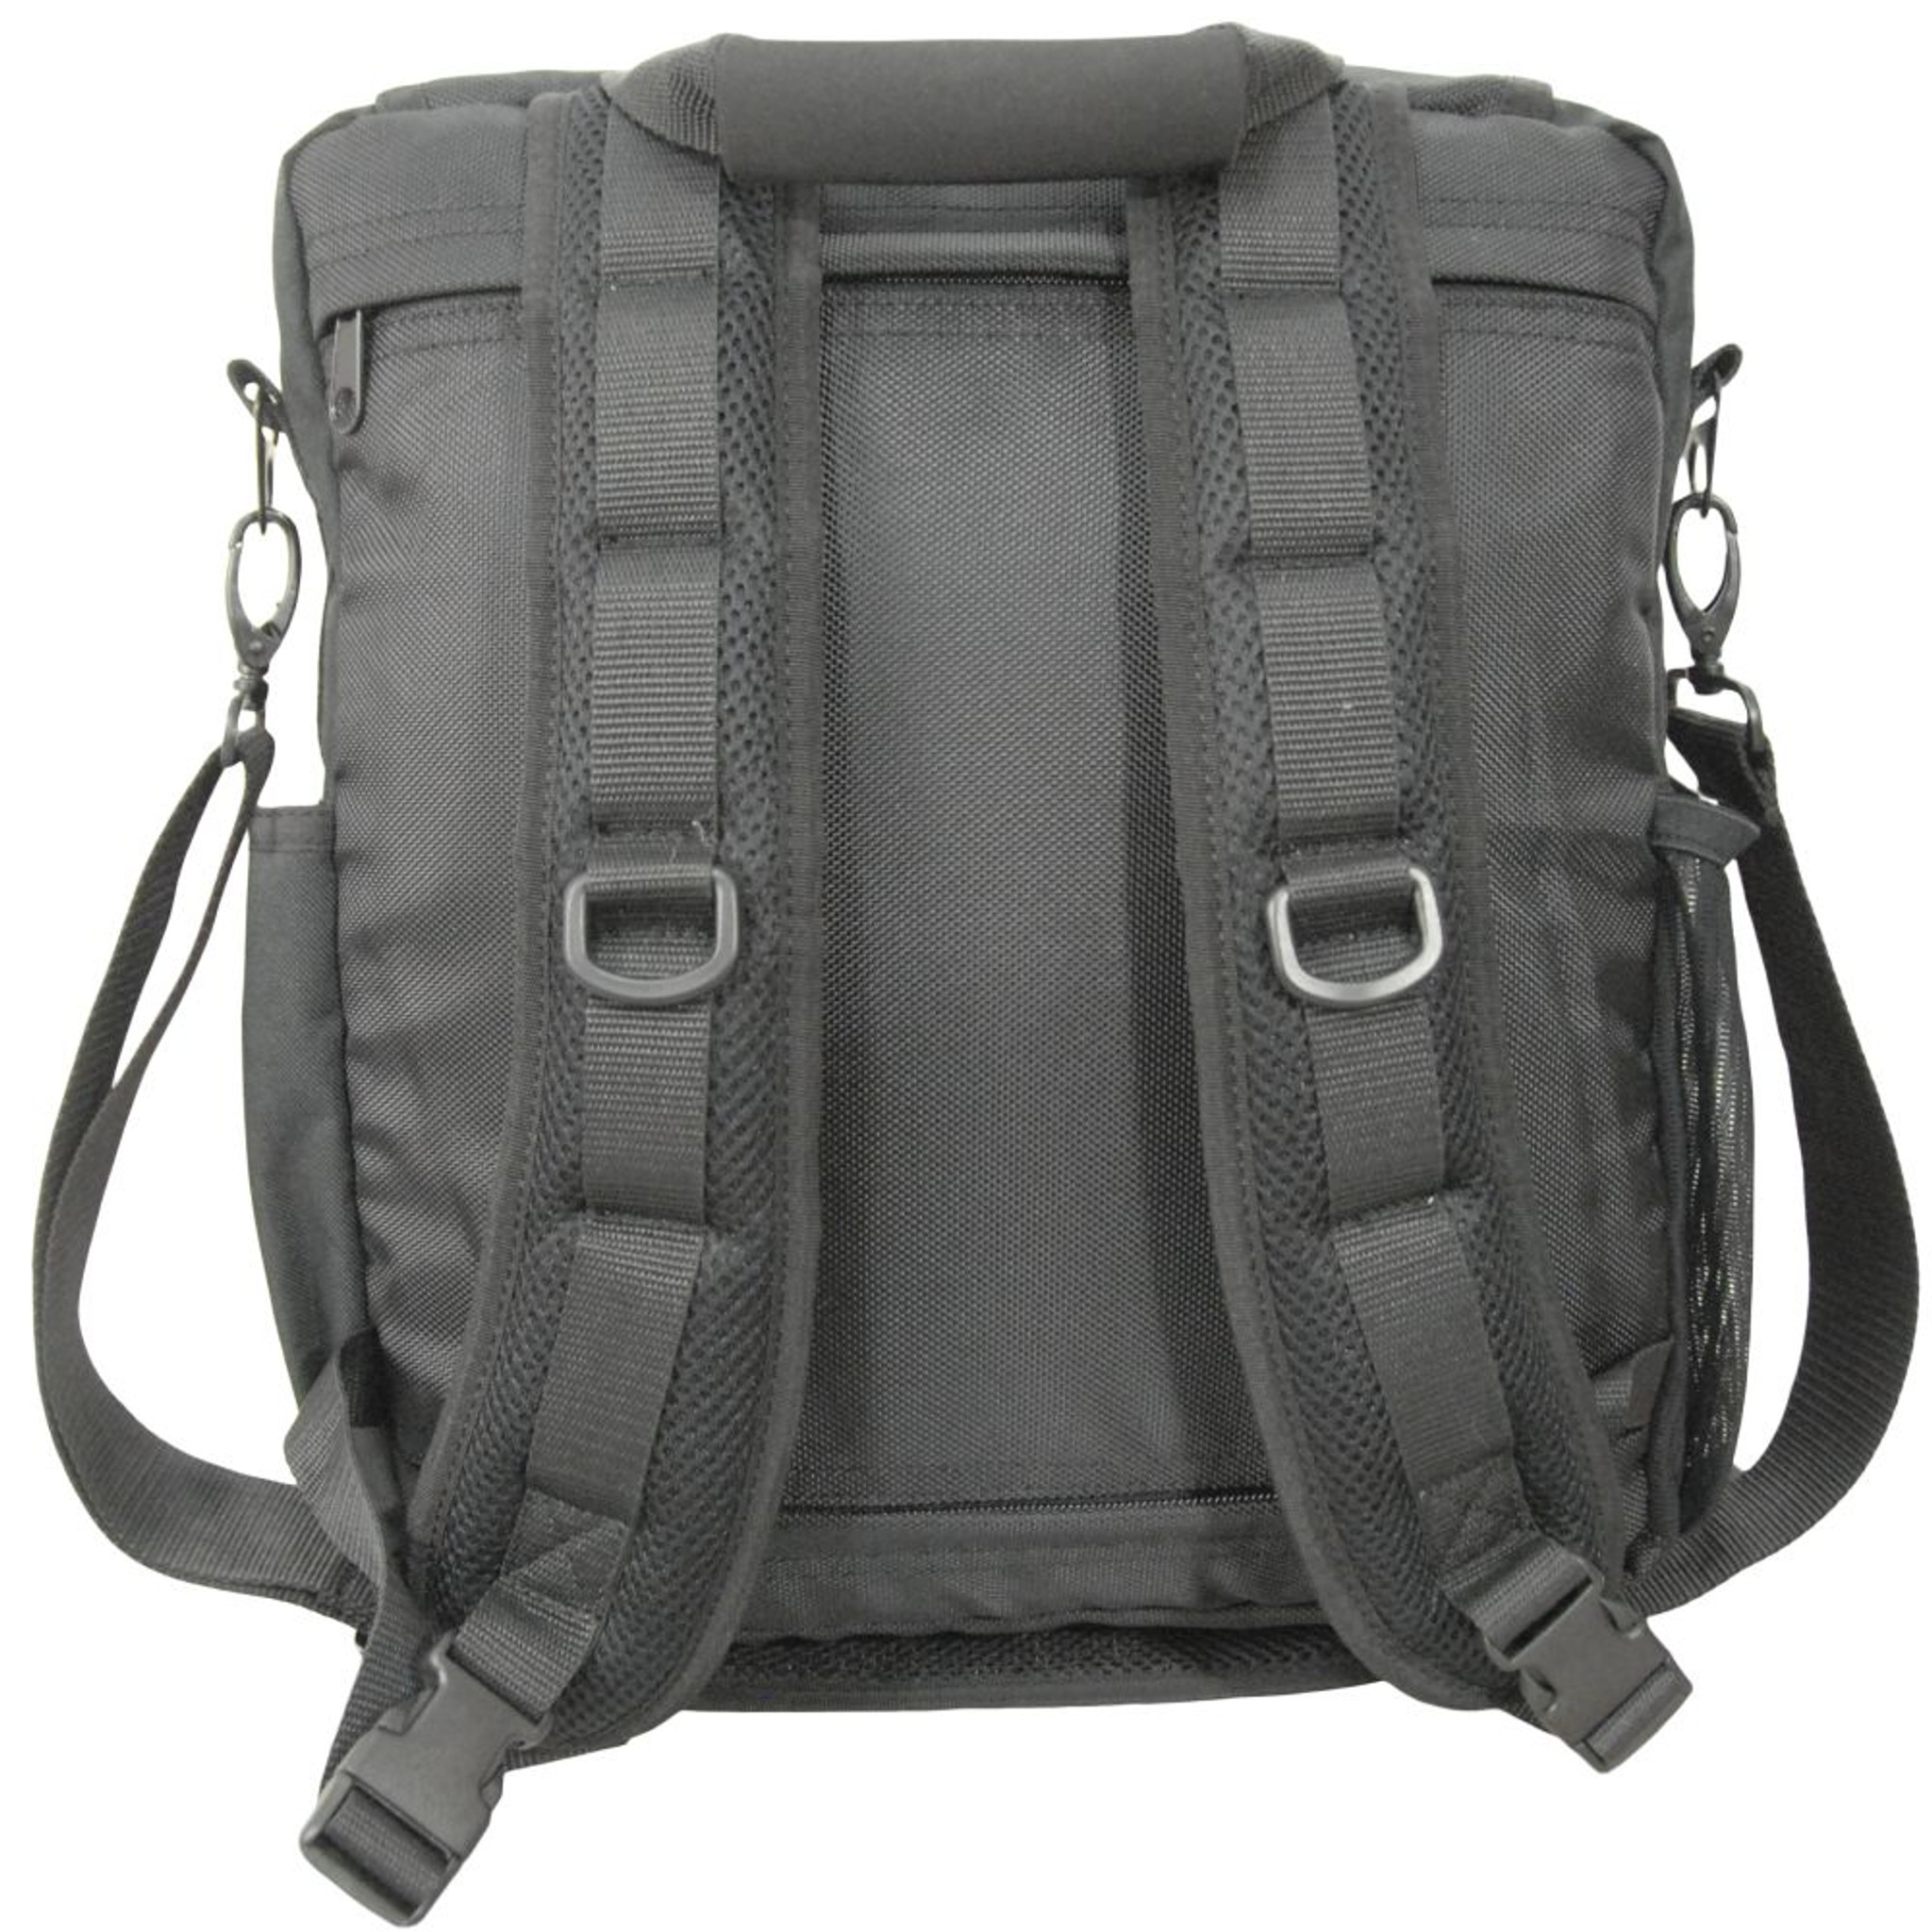 BUSINESS BACKPACK - Flying Circle Gear